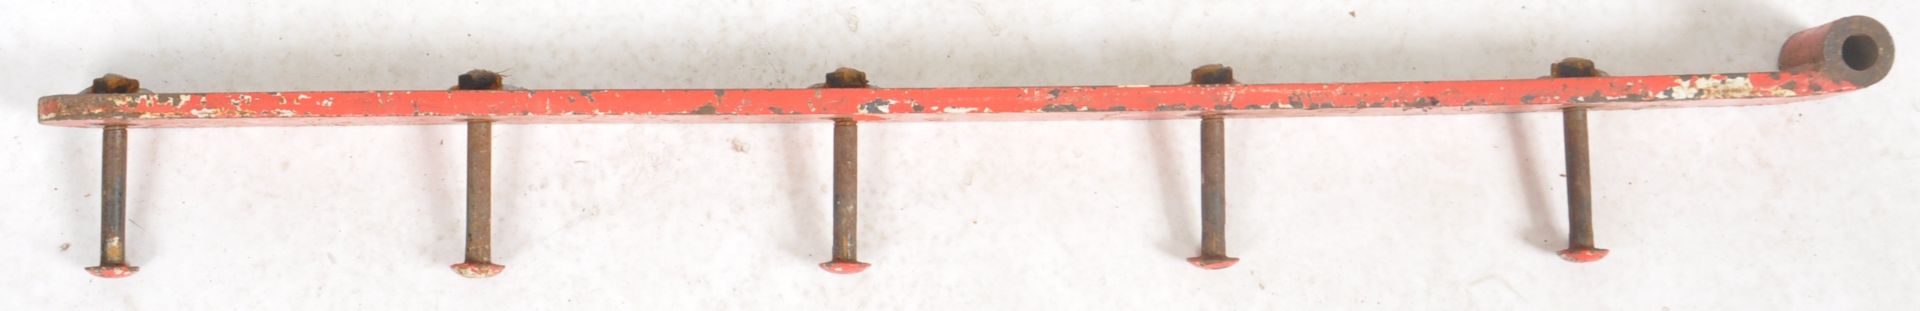 EARLY 20TH CENTURY UPCYCLED CAR SPRING COAT HOOK RACK - Image 3 of 5